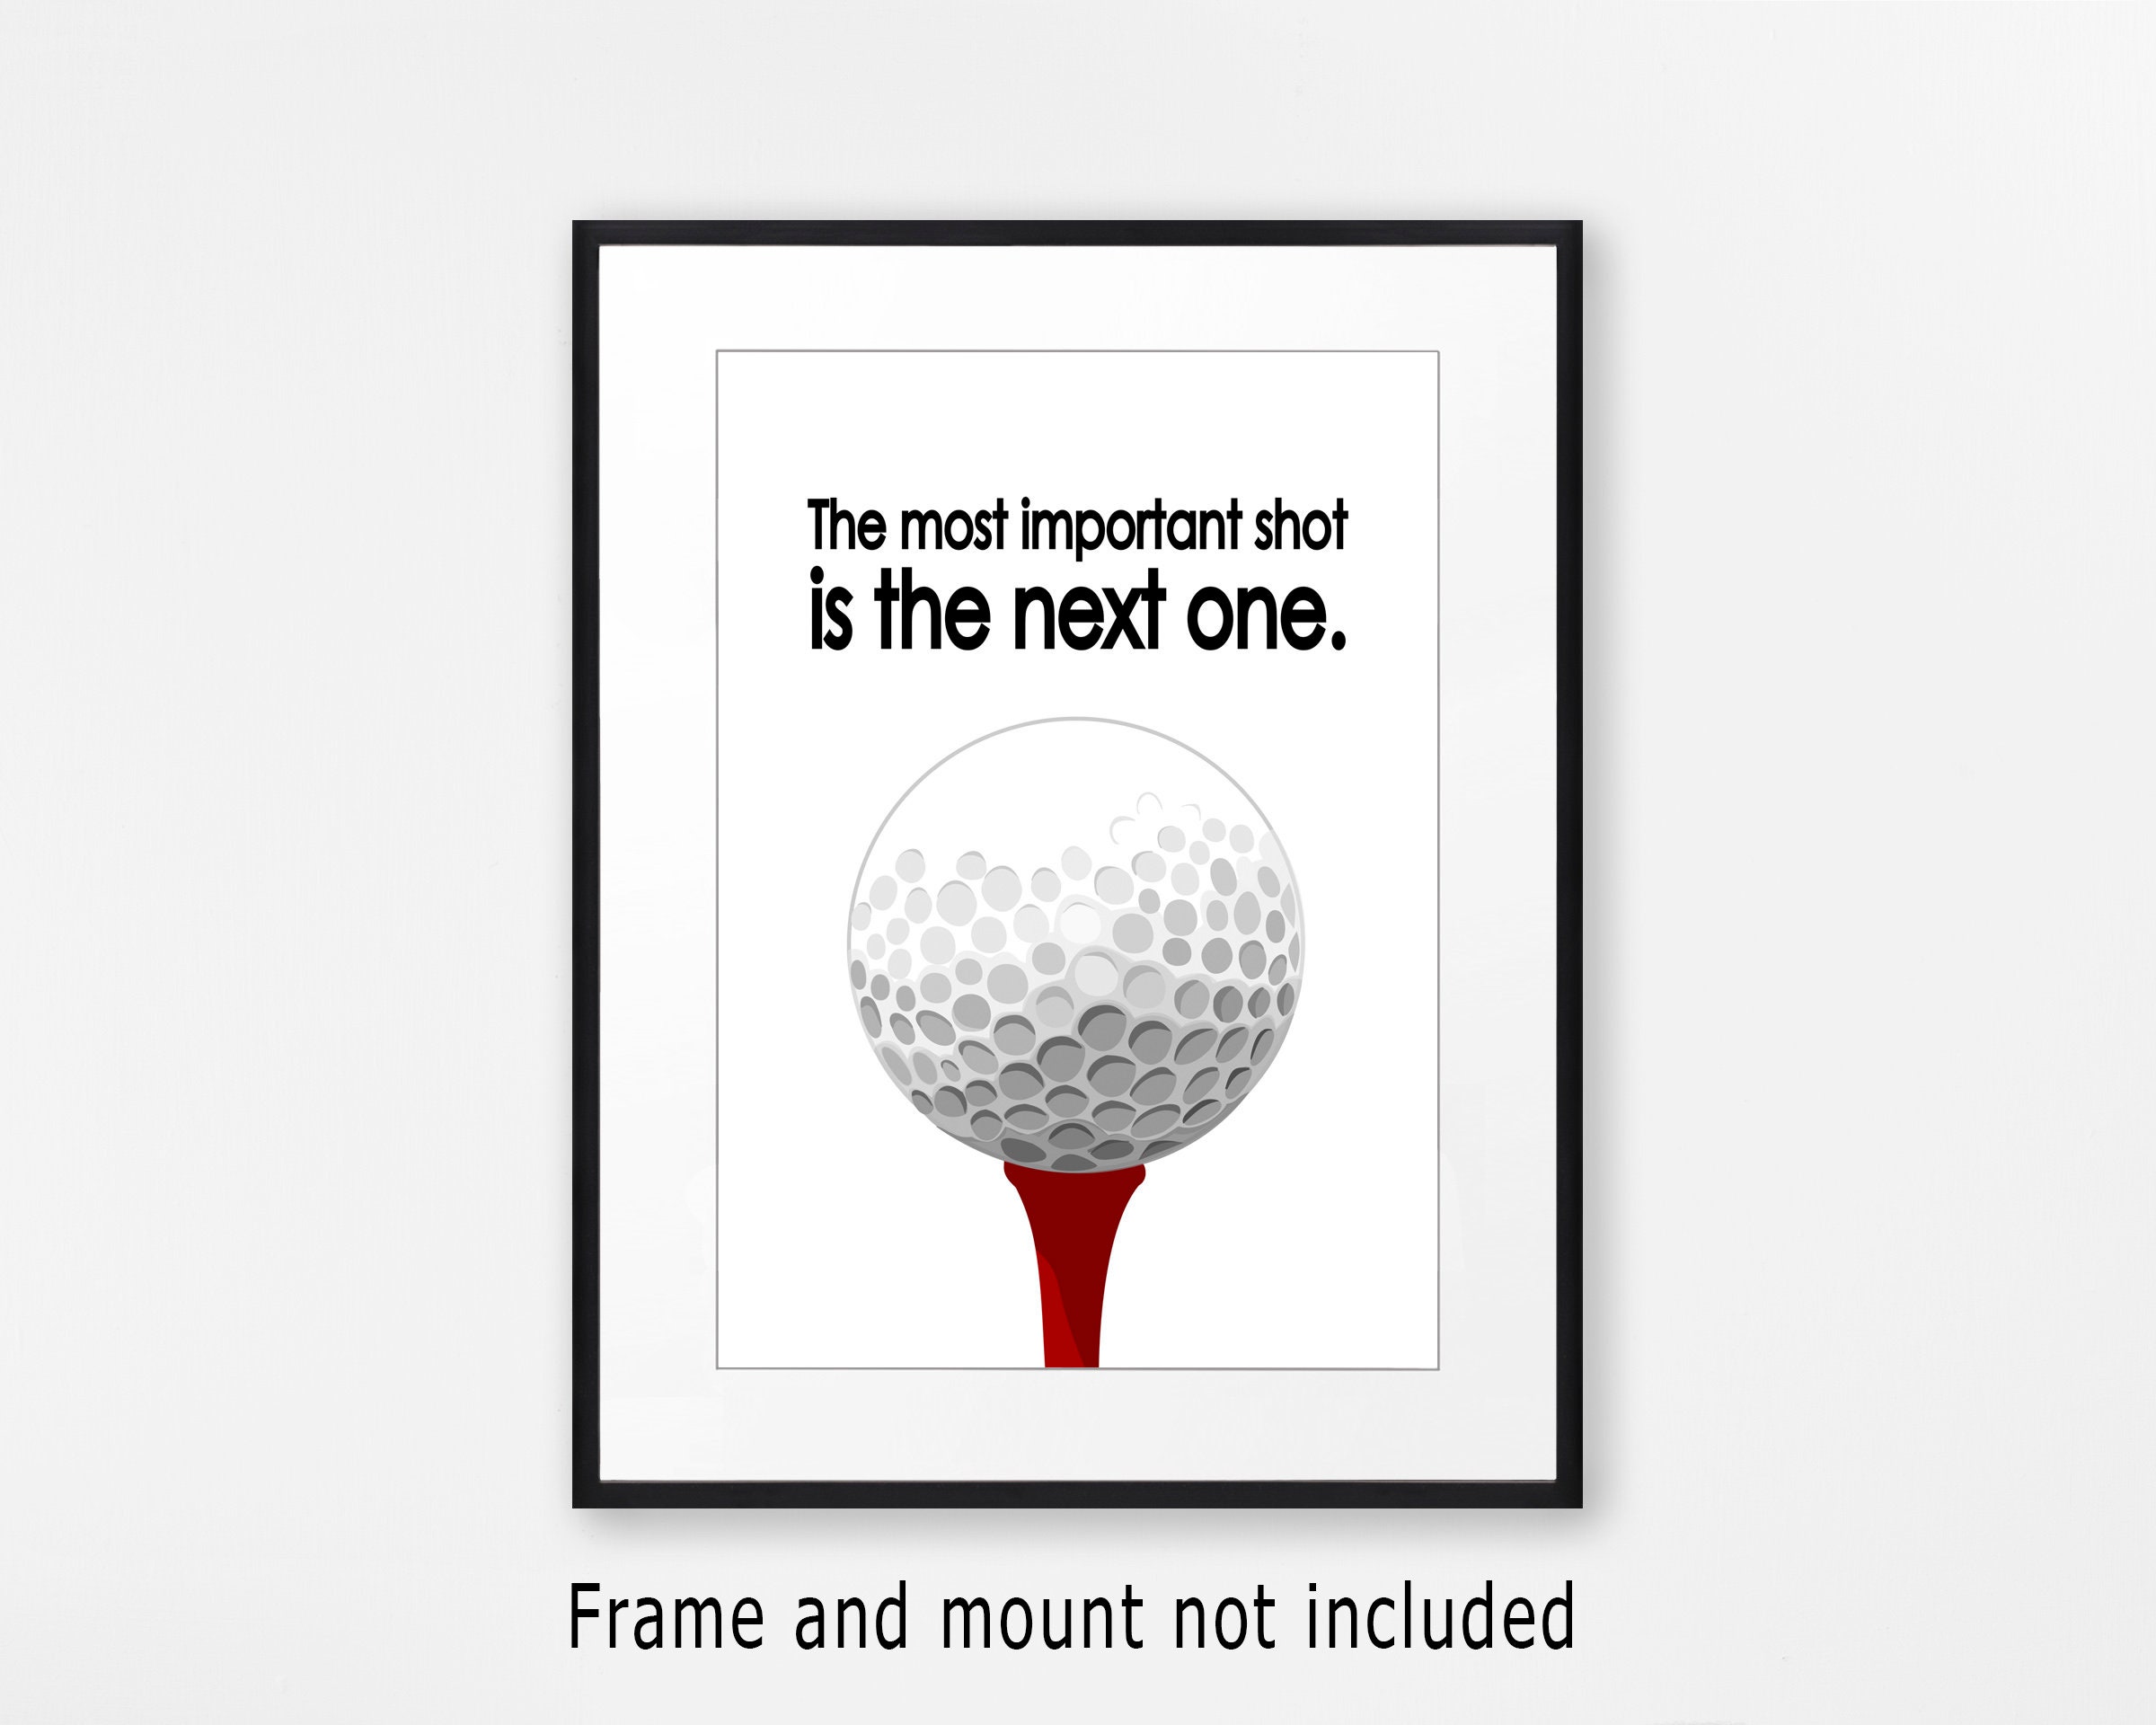 Golf, Funny Golf Gifts for Men Picture Frame 10X10 6355 – Crossroads Home  Decor